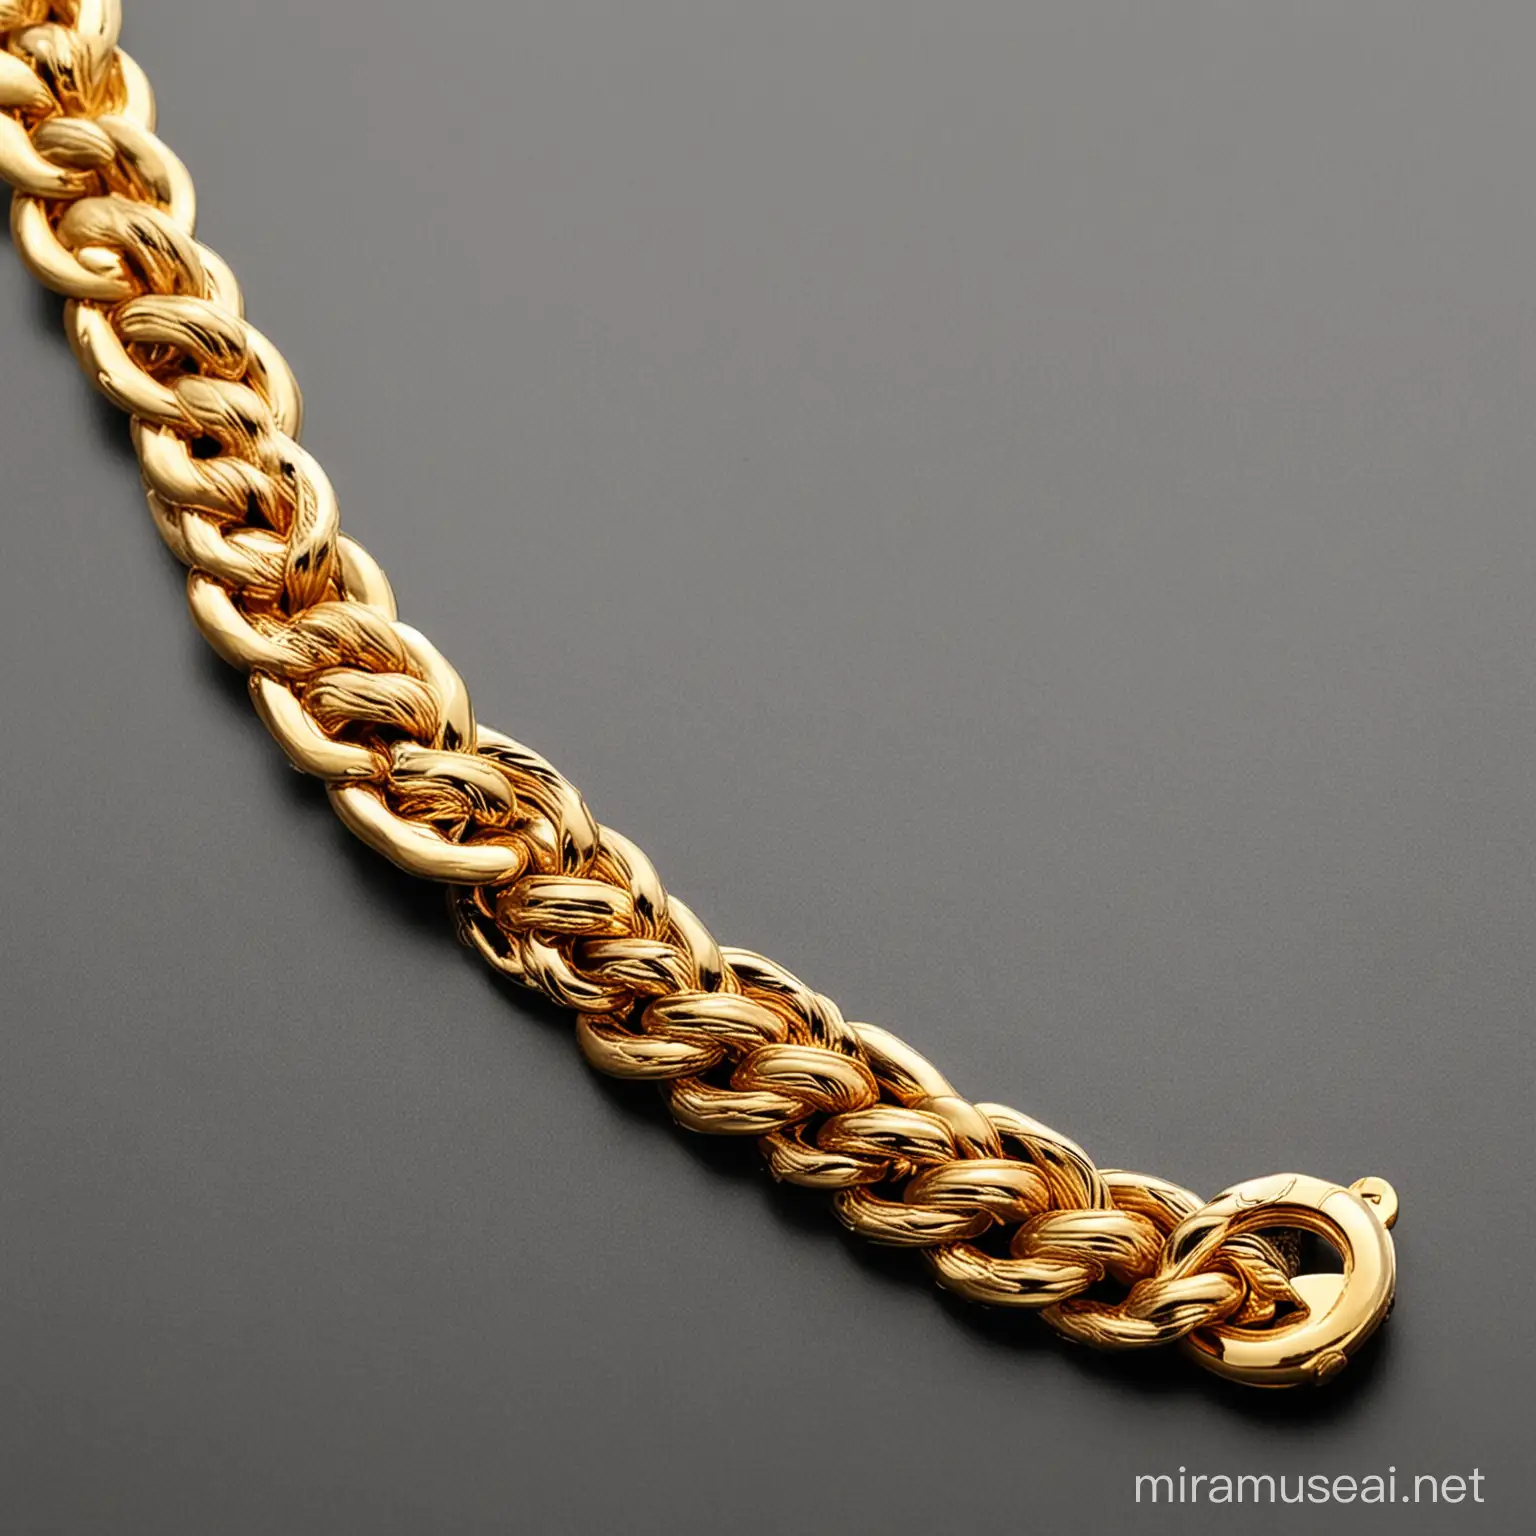 A golden chain jewellery
